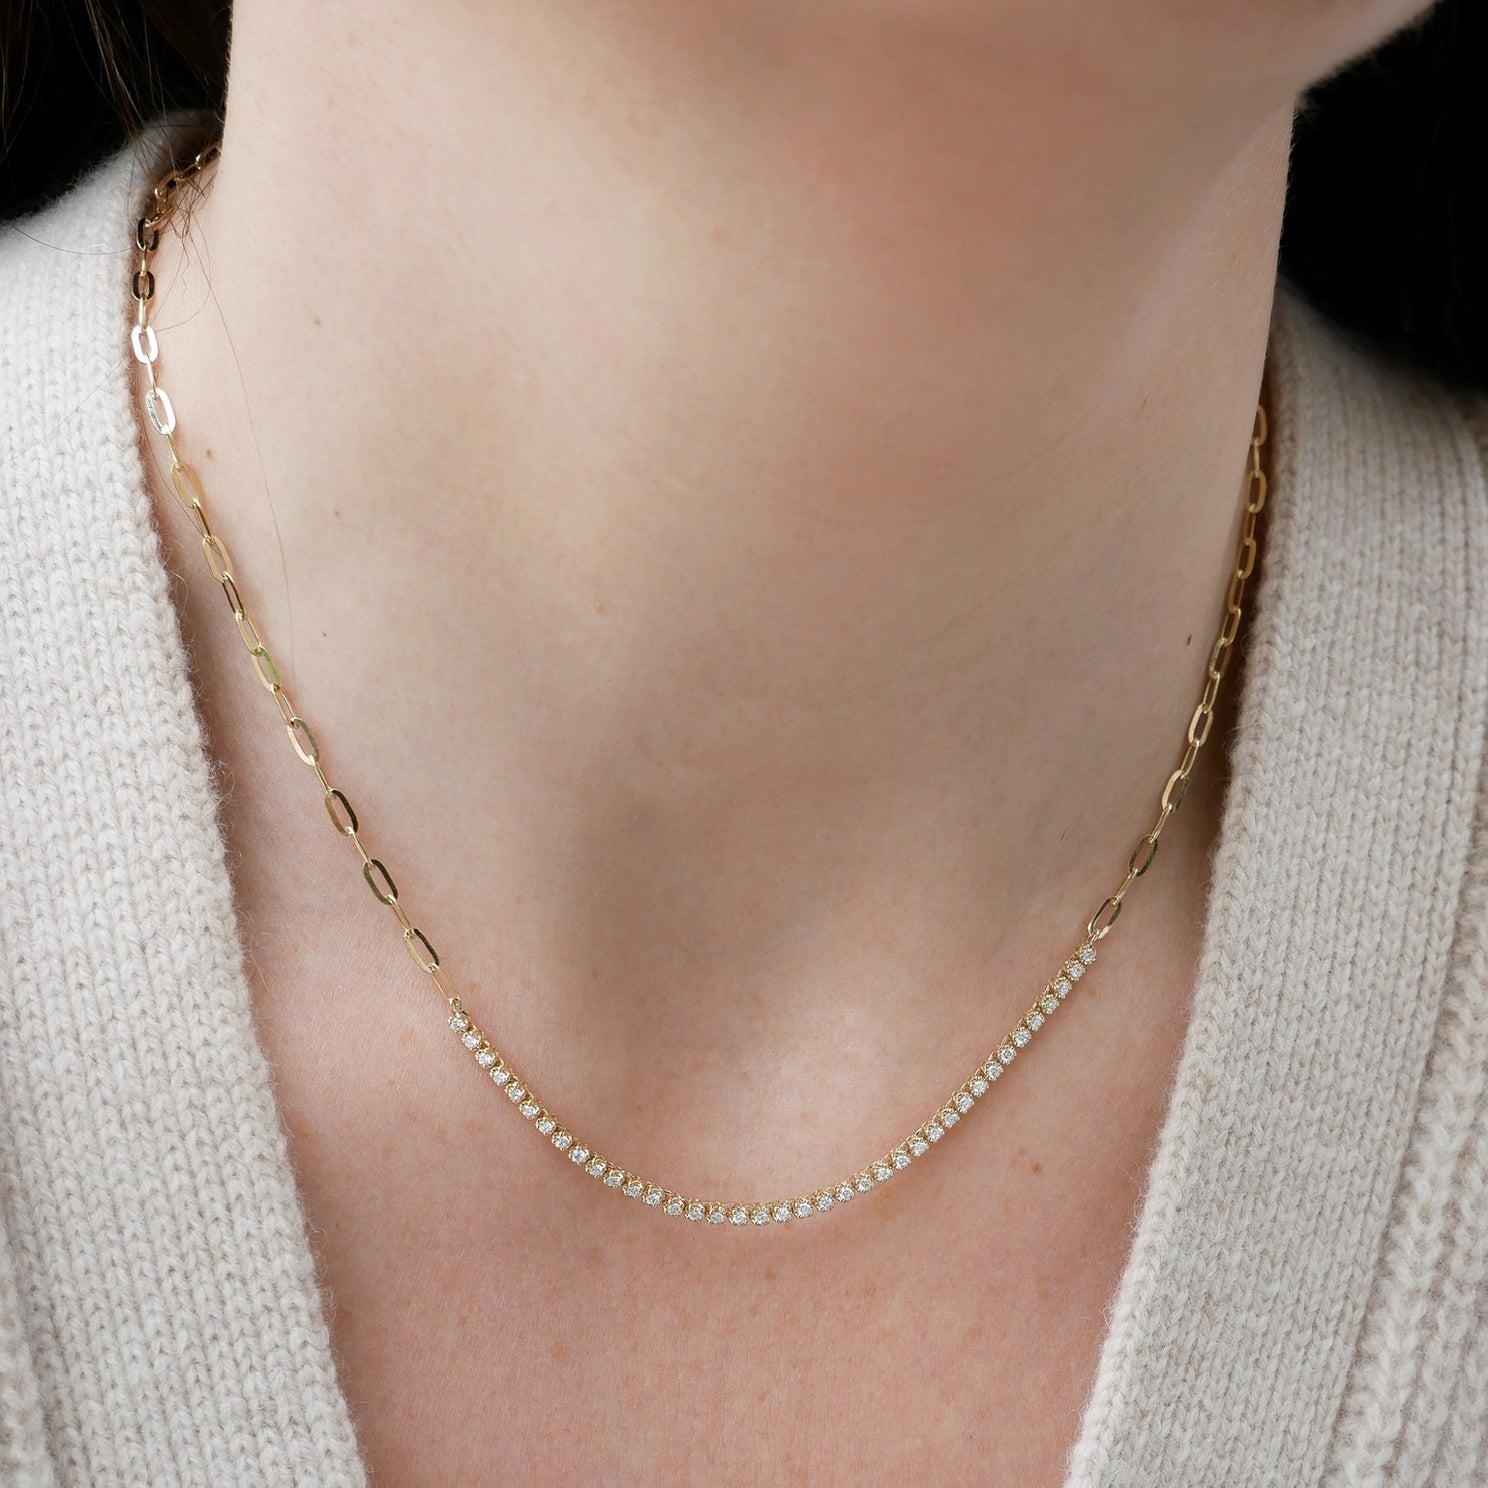 Diamond Segment Mini Link Necklace in 14k yellow gold styled on neck of model